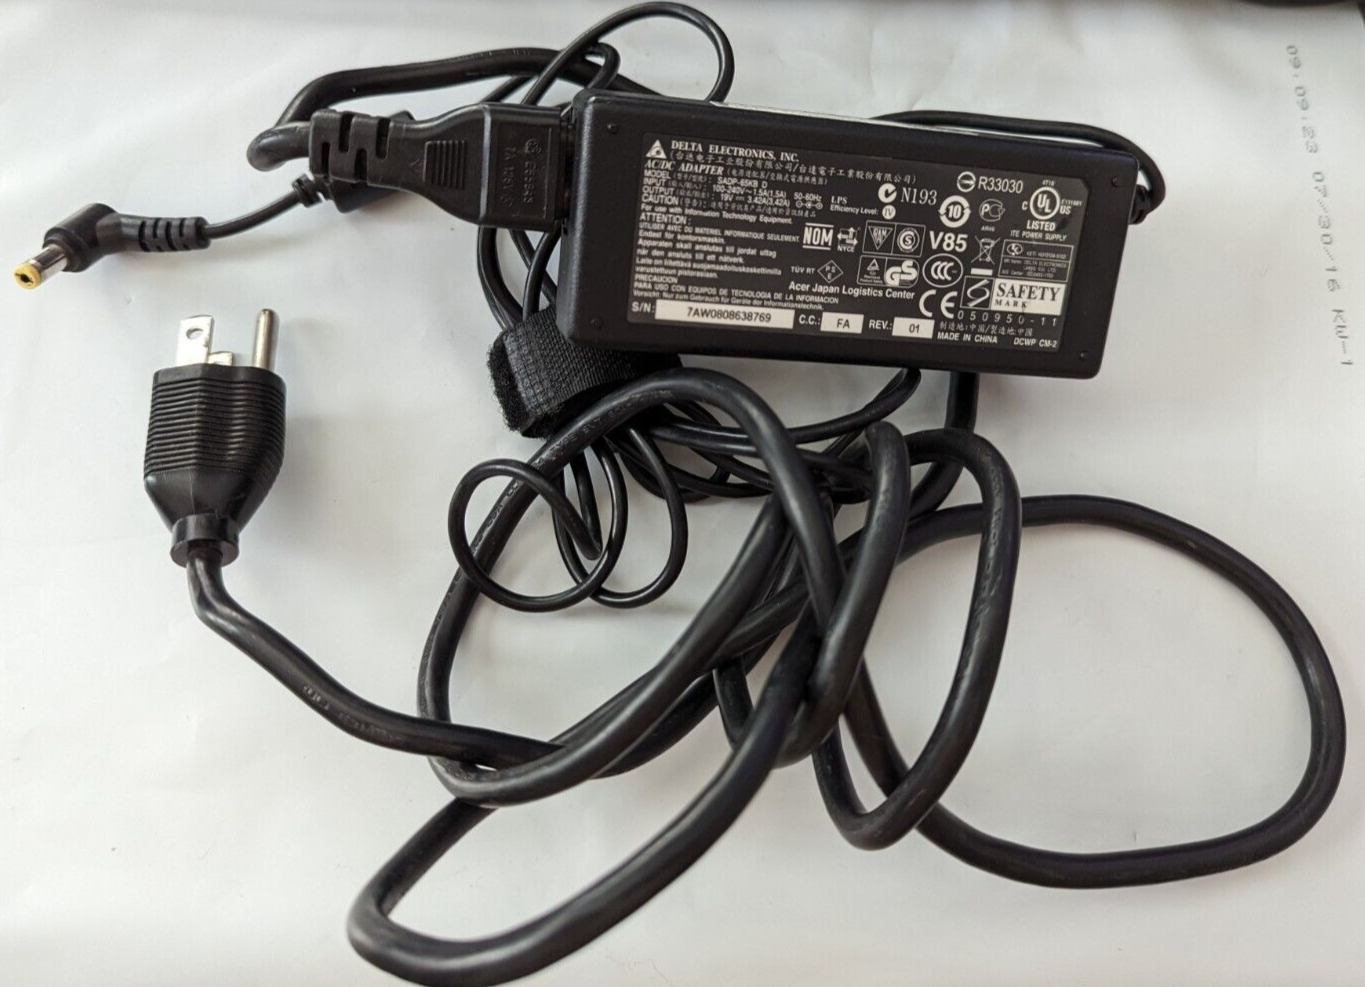 *Brand NEW*Delta Electronics 19V 3.42A 65W AC Adapter SADP-65KB A Charger Cord POWER Supply